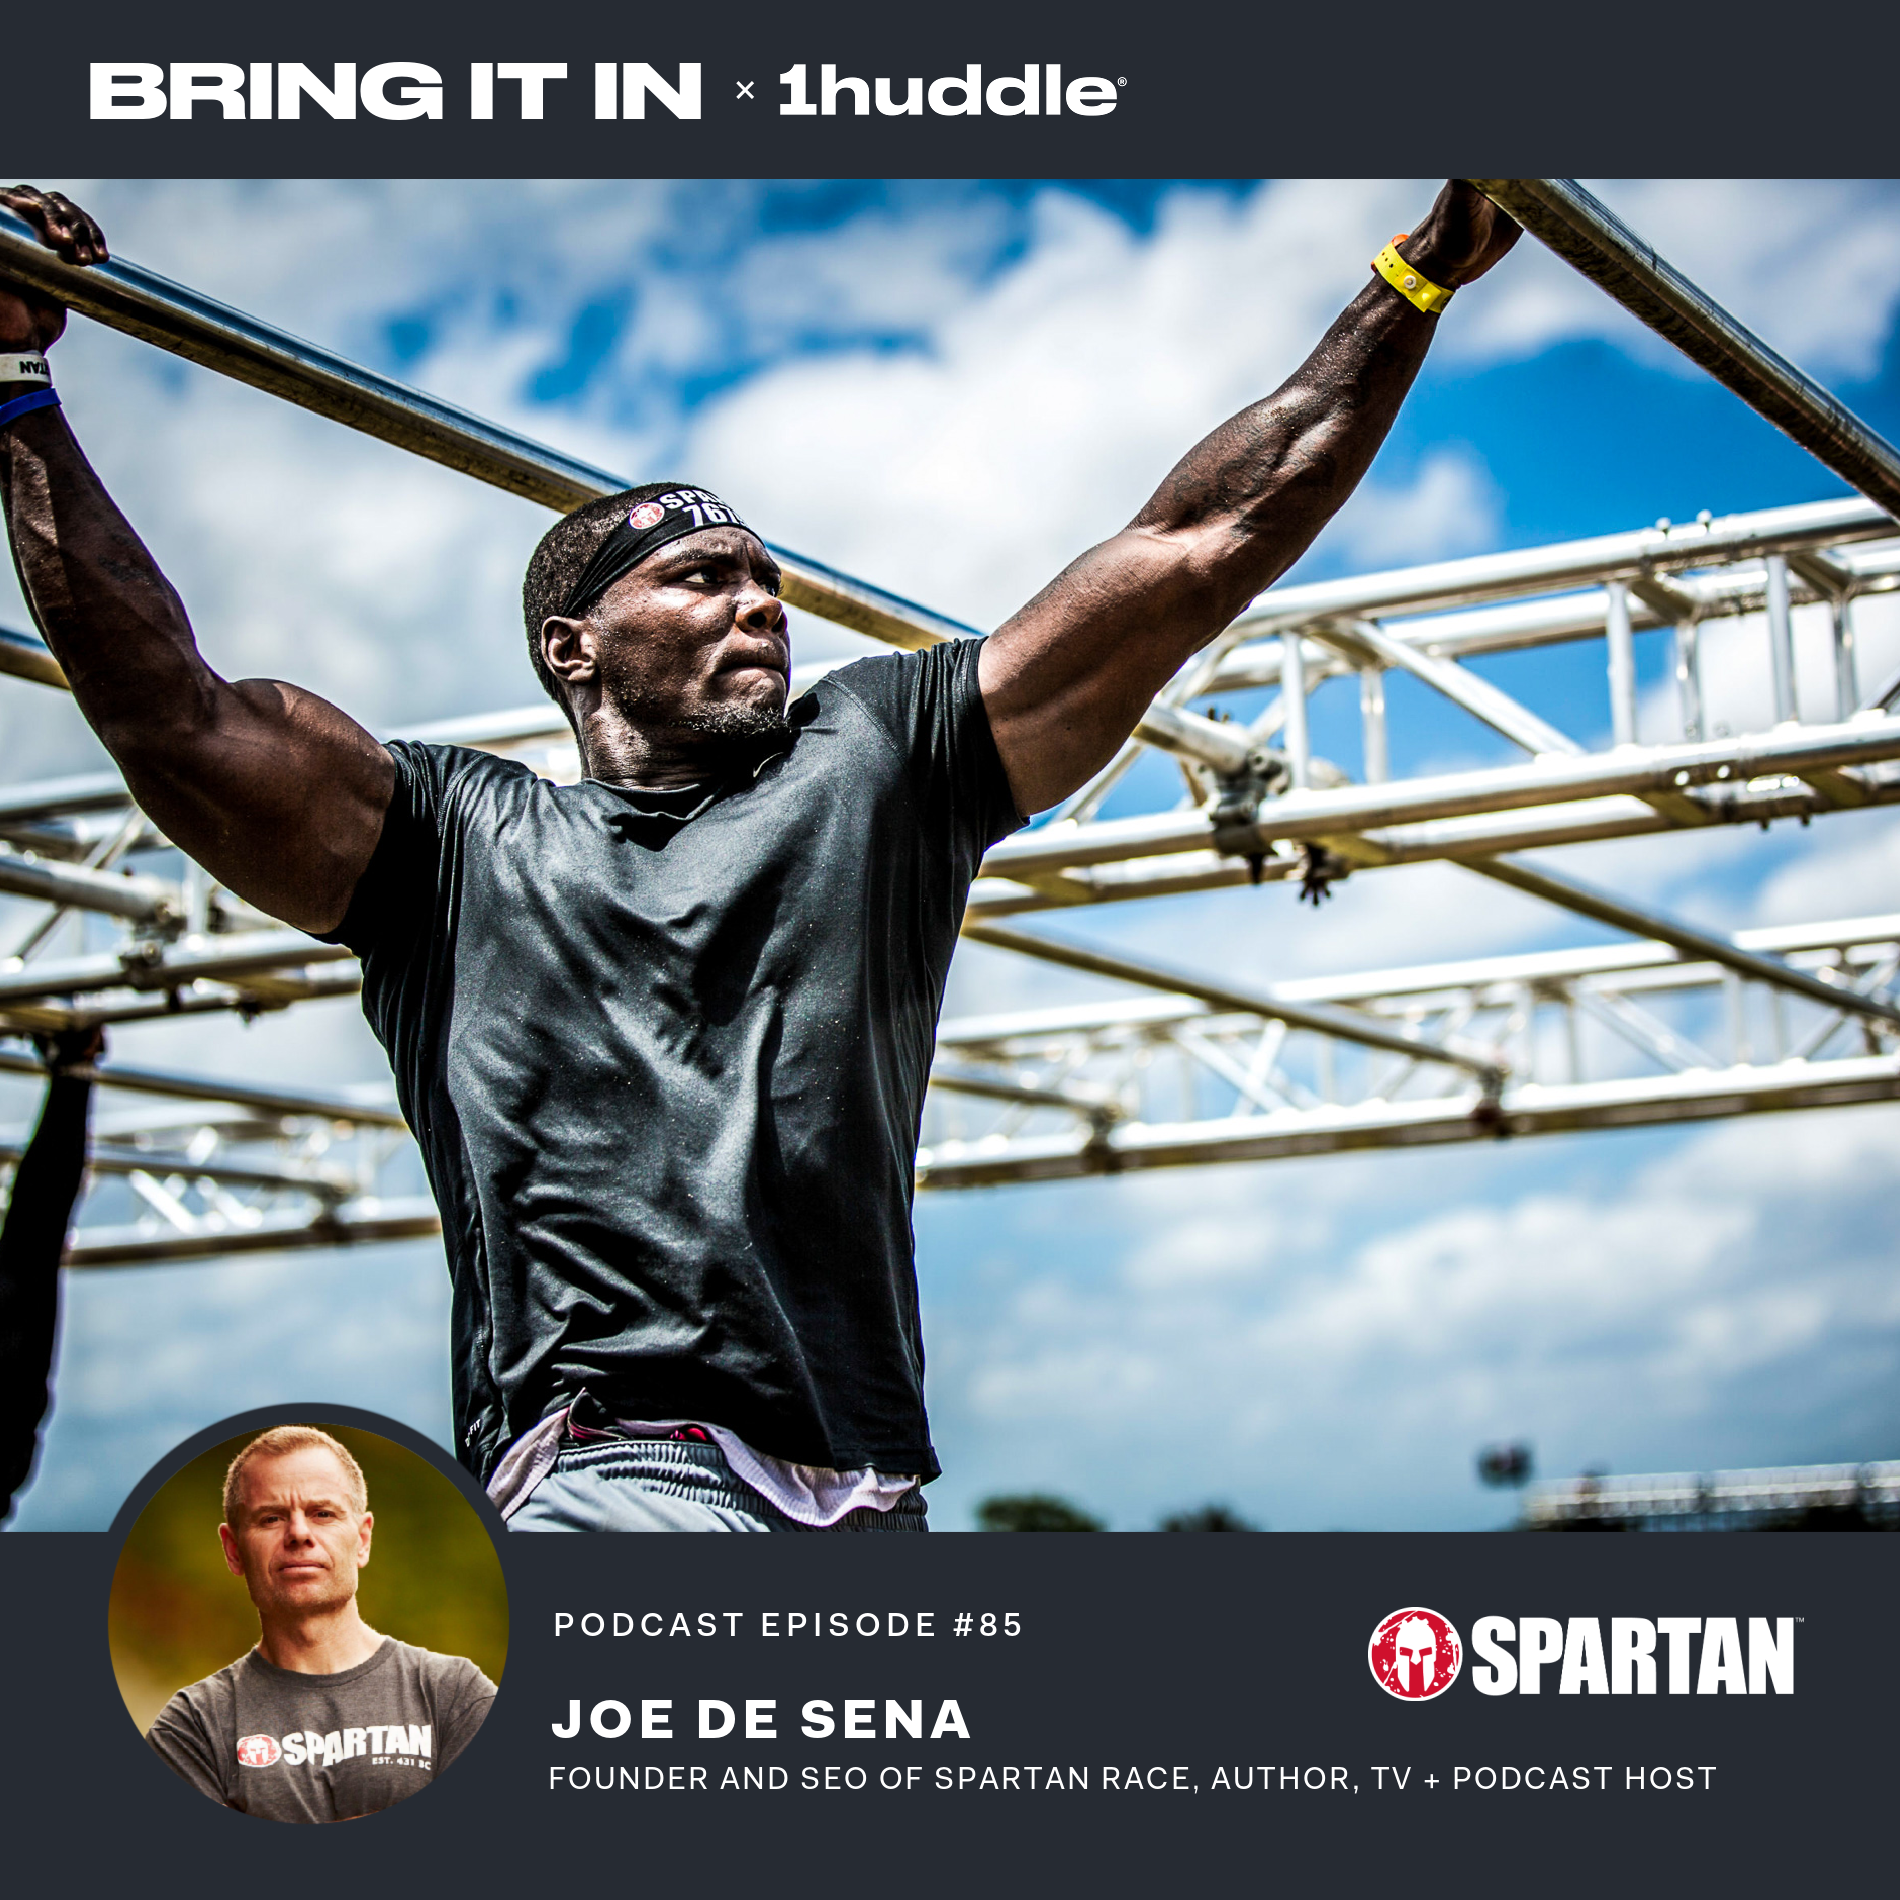 Founder and CEO of Spartan Race, Author and Podcast Host of “Spartan Up!,” and Host of CNBC’s “No Retreat: Business Bootcamp”